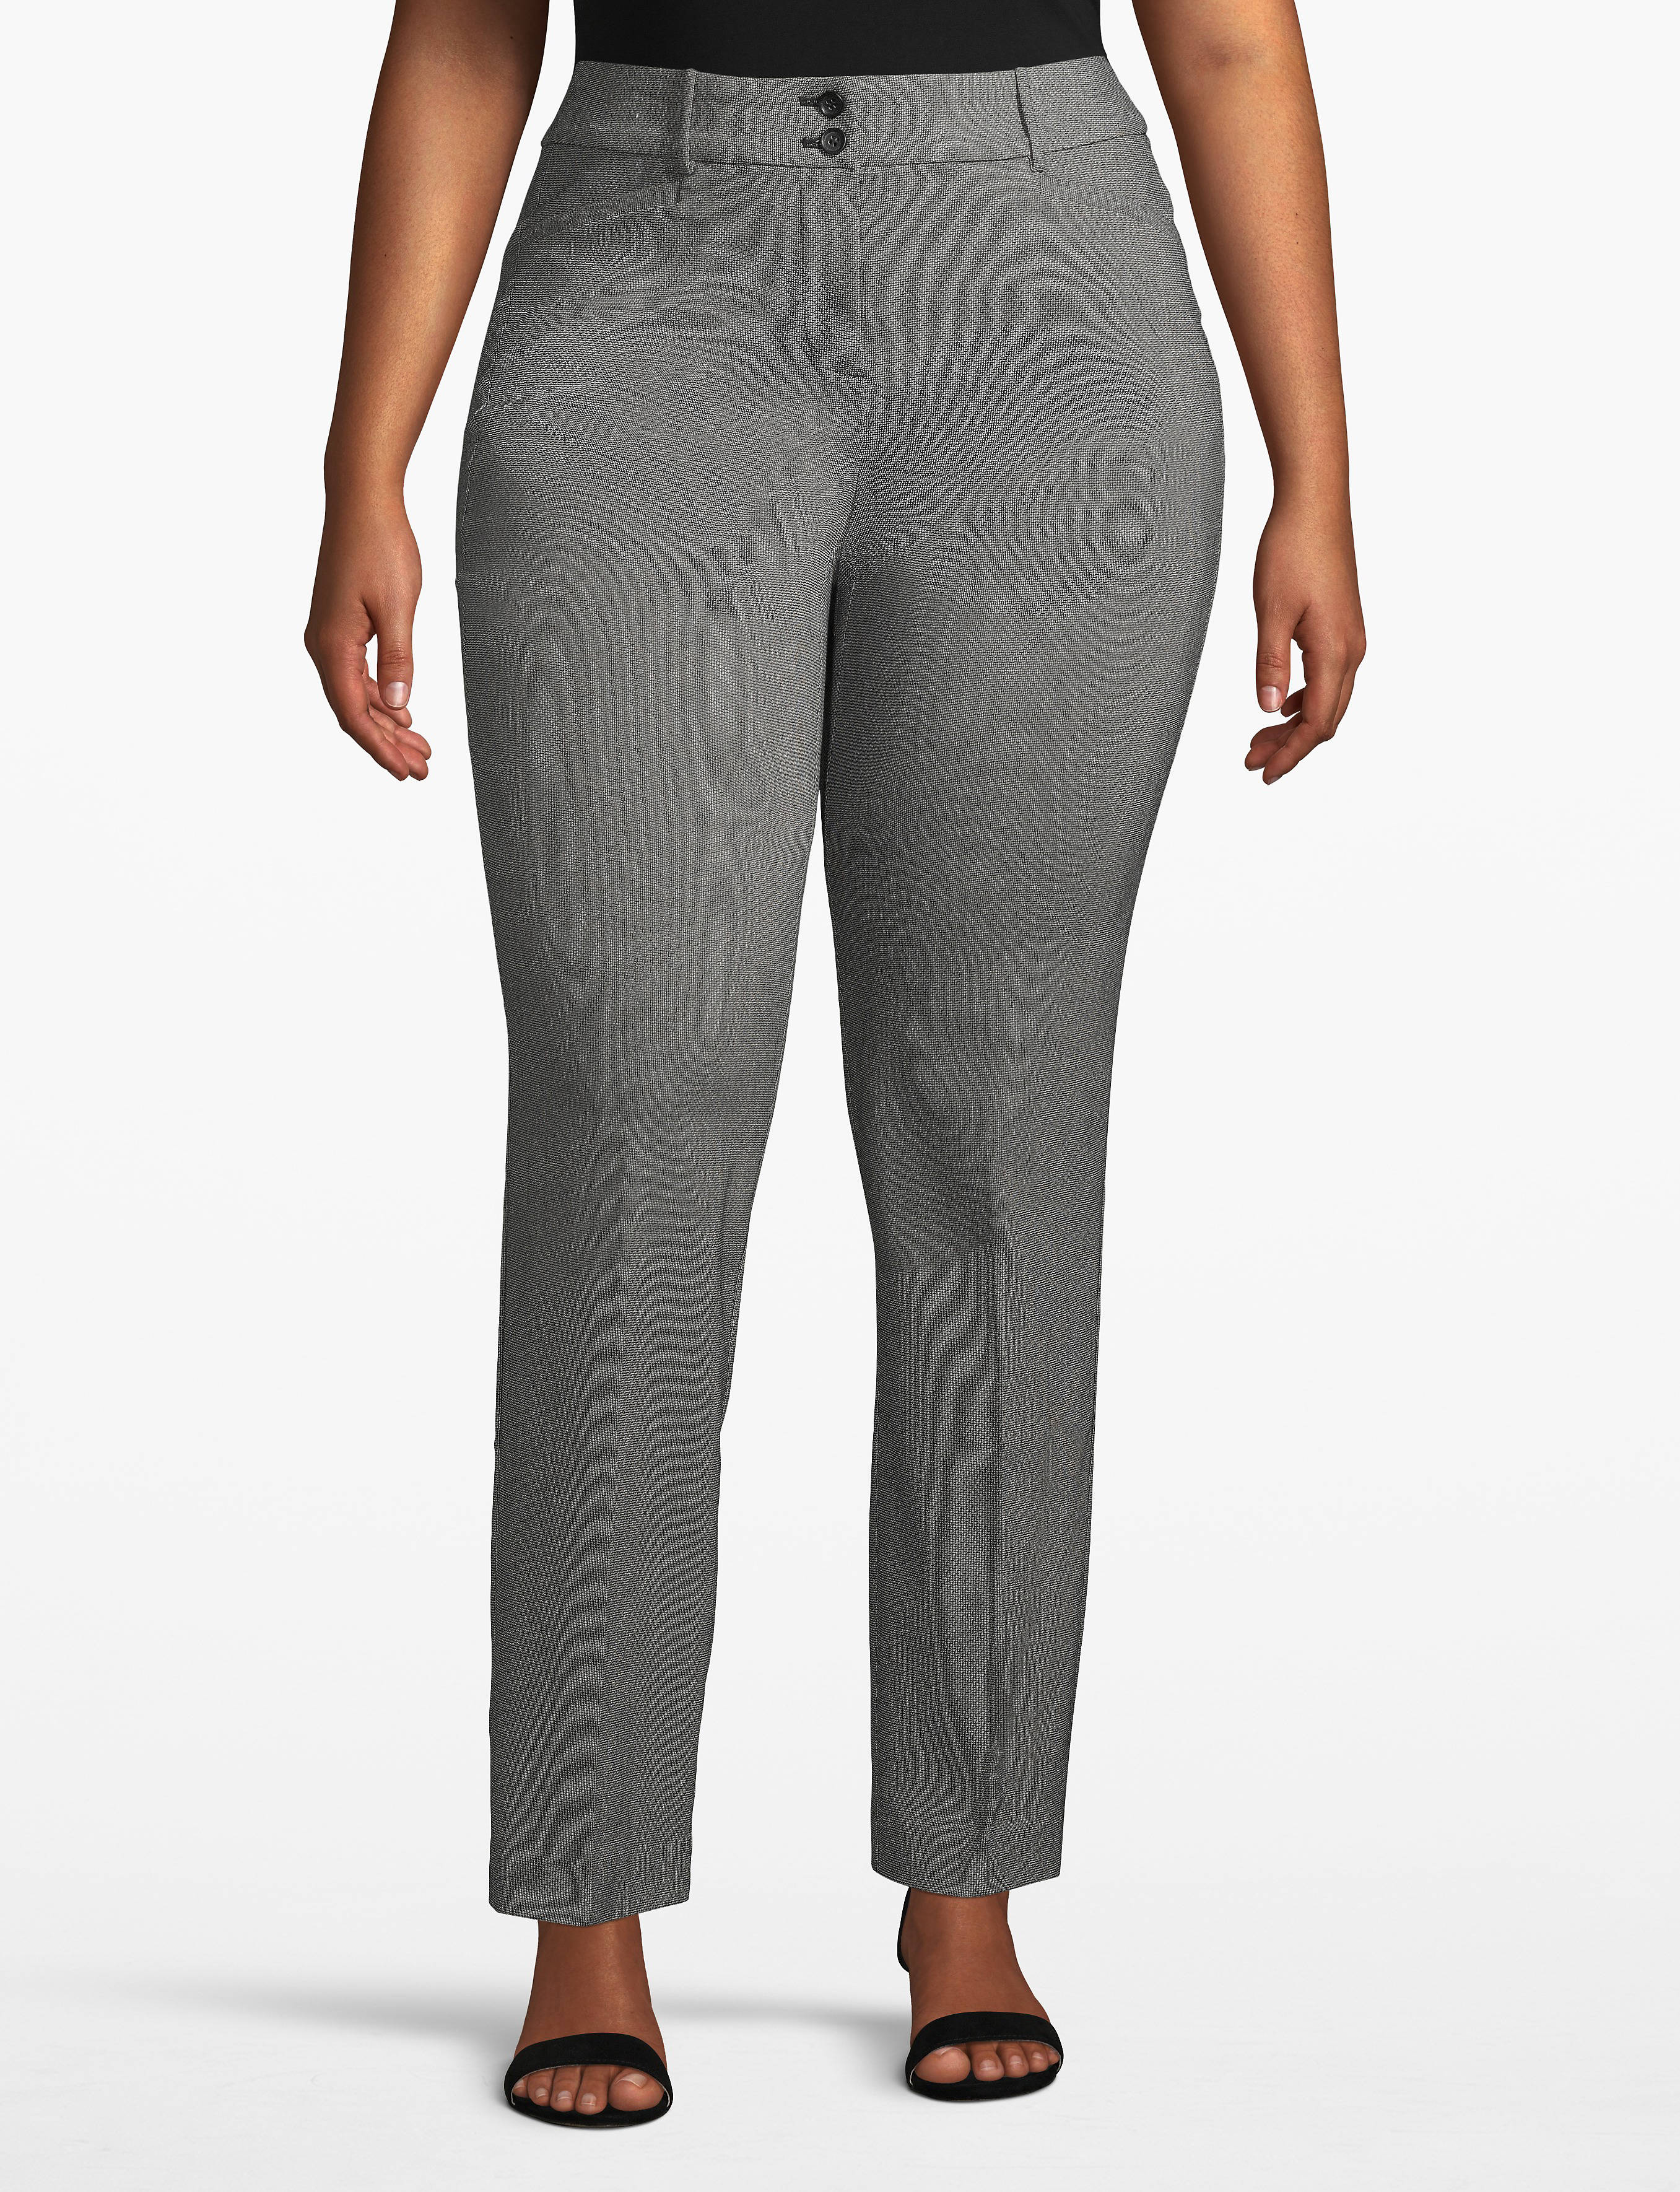 Madison Mid-Rise No Gap Straight Leg Pant 1116021 [Copy of 1114377] Outlet:Black/ White- As Hanger (LBO):16 Product Image 1